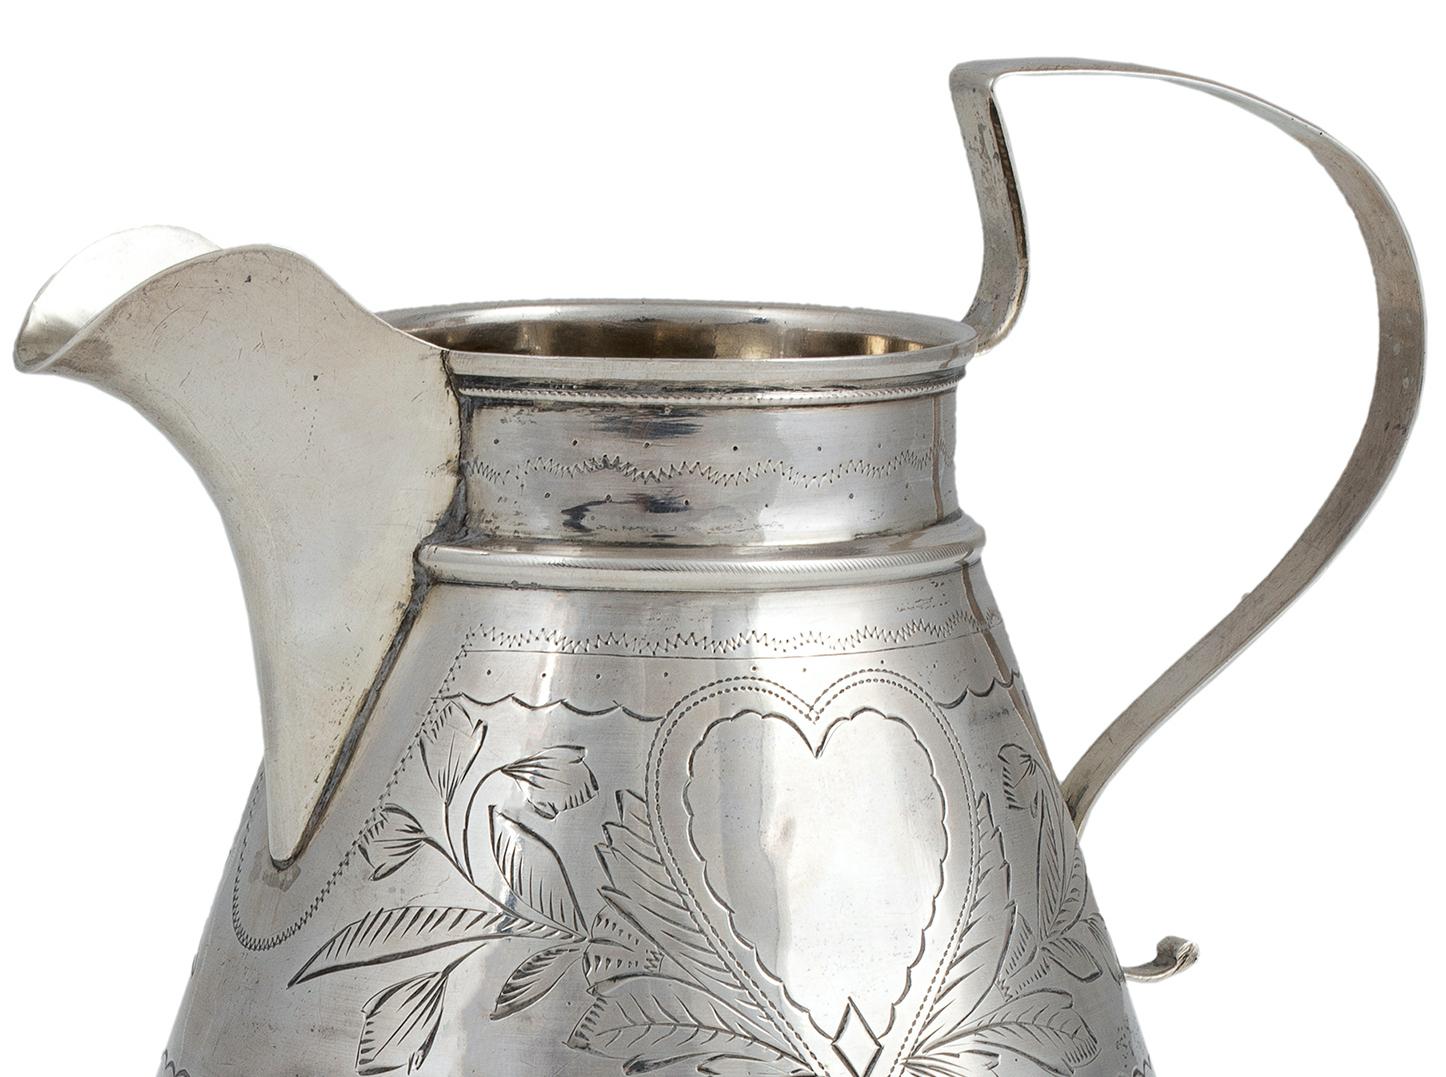 Precious silver milk jug realized in Moscow during the years 1899-1908.

Made of 875/1000 silver. Weight: 0.147 Kgs

This splendid milk jug is characterized by a circular foot, and engravings with floreal decorations.
Its realization is by I.L.